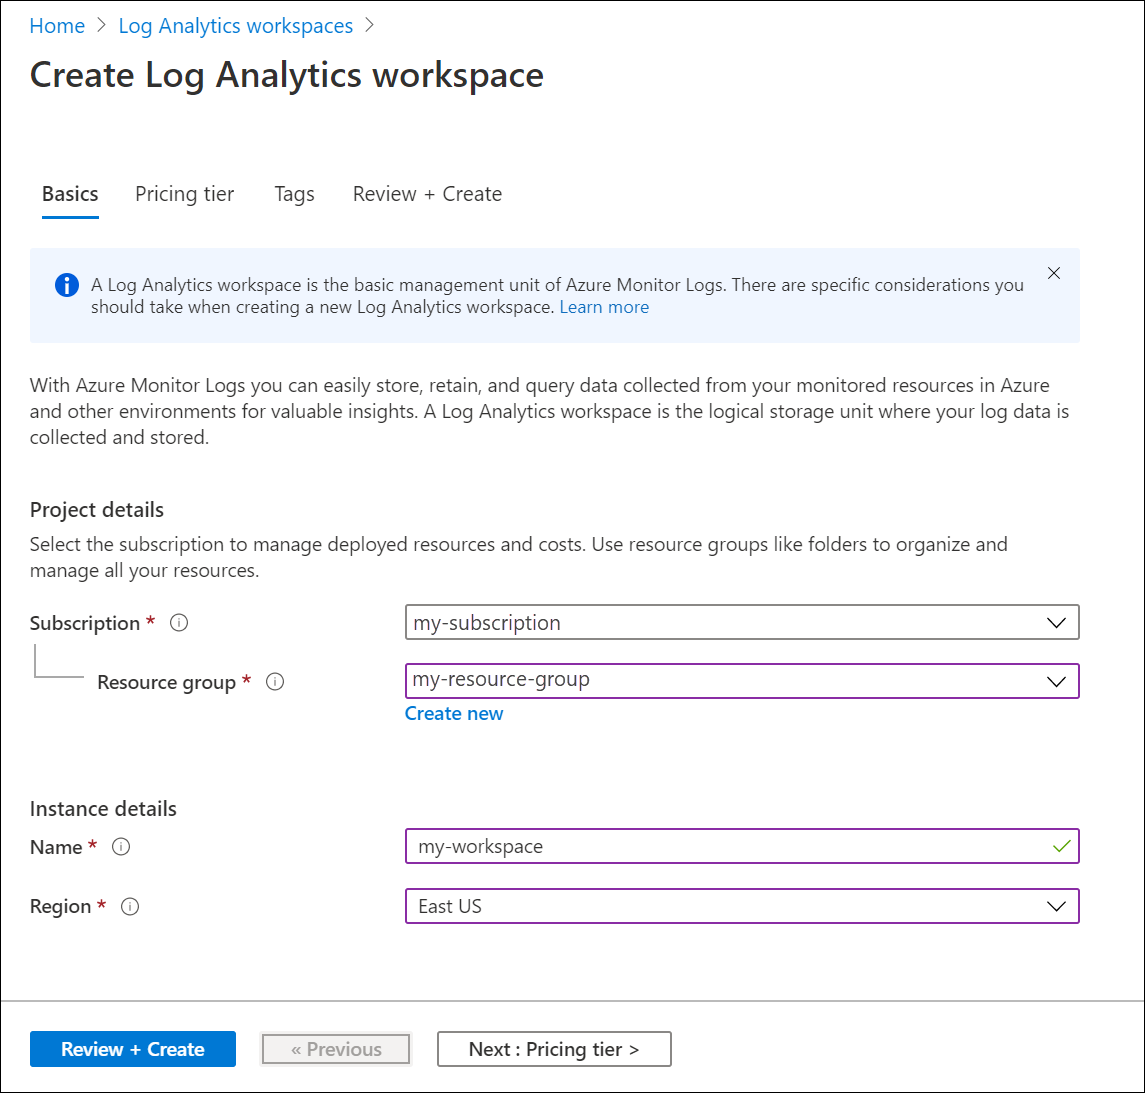 Screenshot that shows the boxes that need to be populated on the Basics tab of the Create Log Analytics workspace screen.